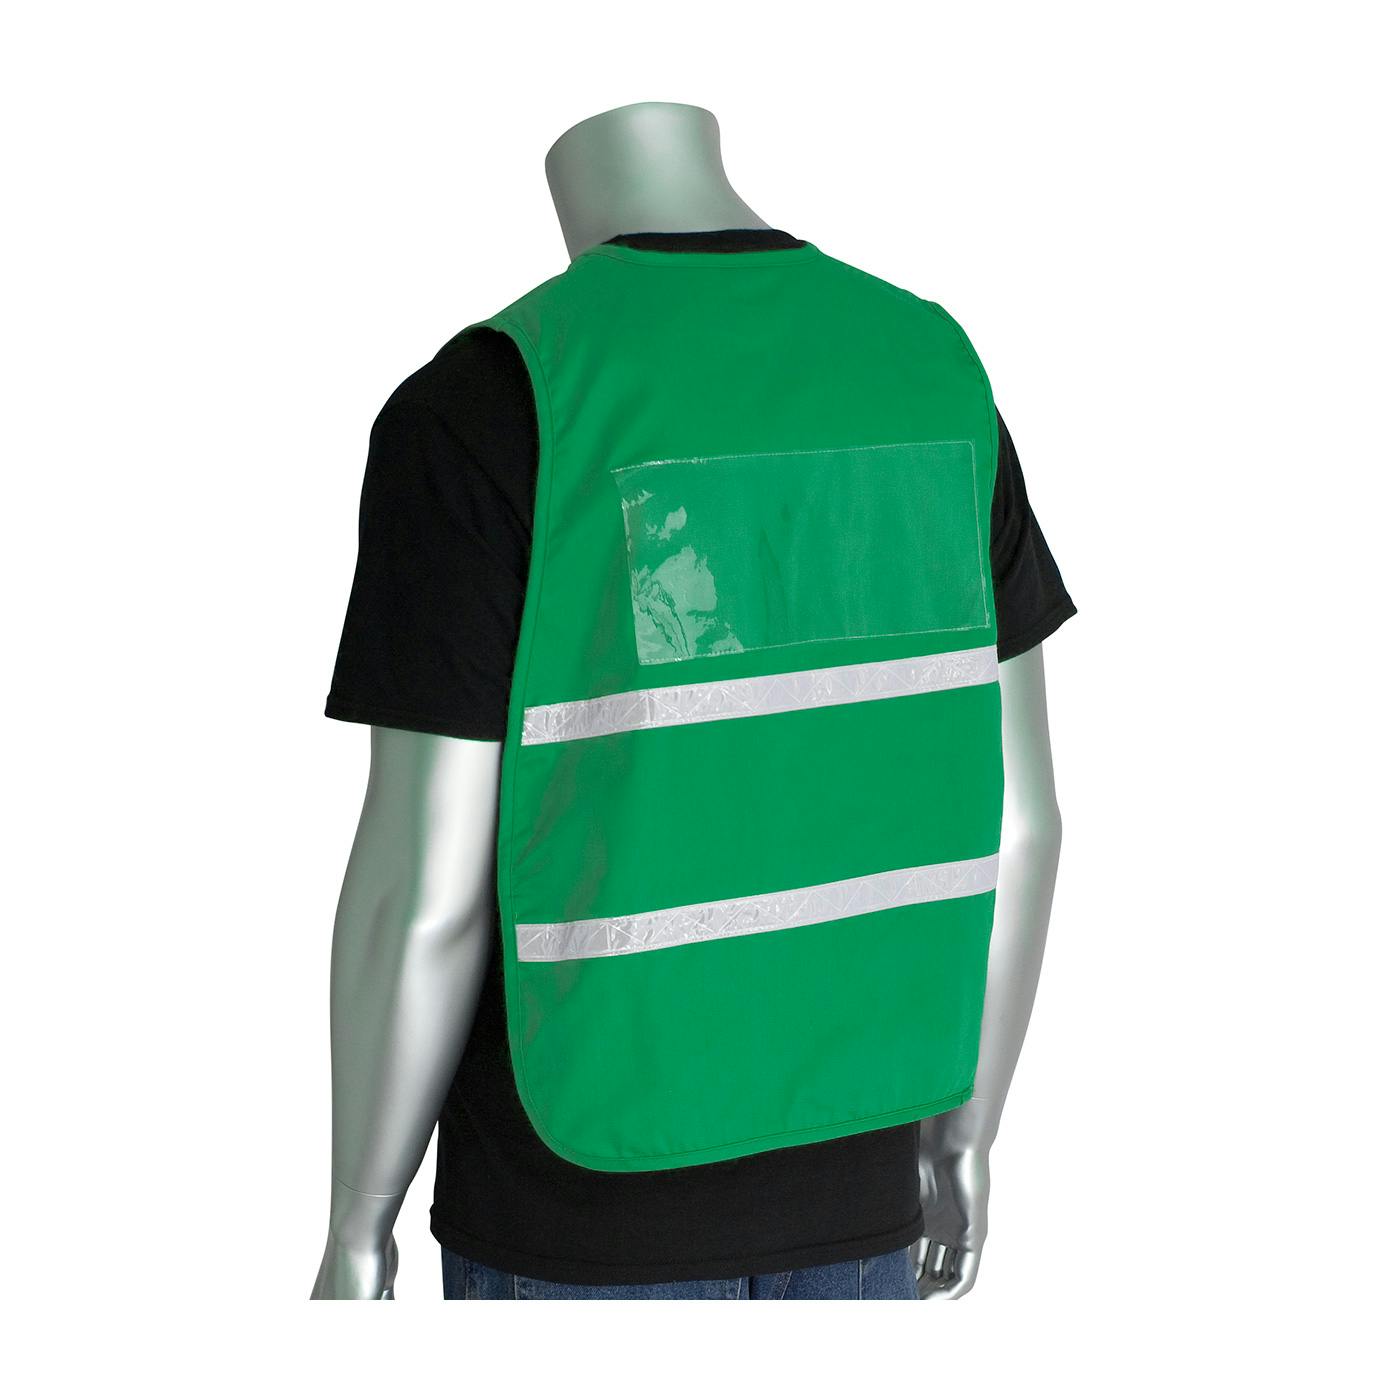 Non-ANSI Incident Command Vest - Cotton/Polyester Blend, Green (300-2505)